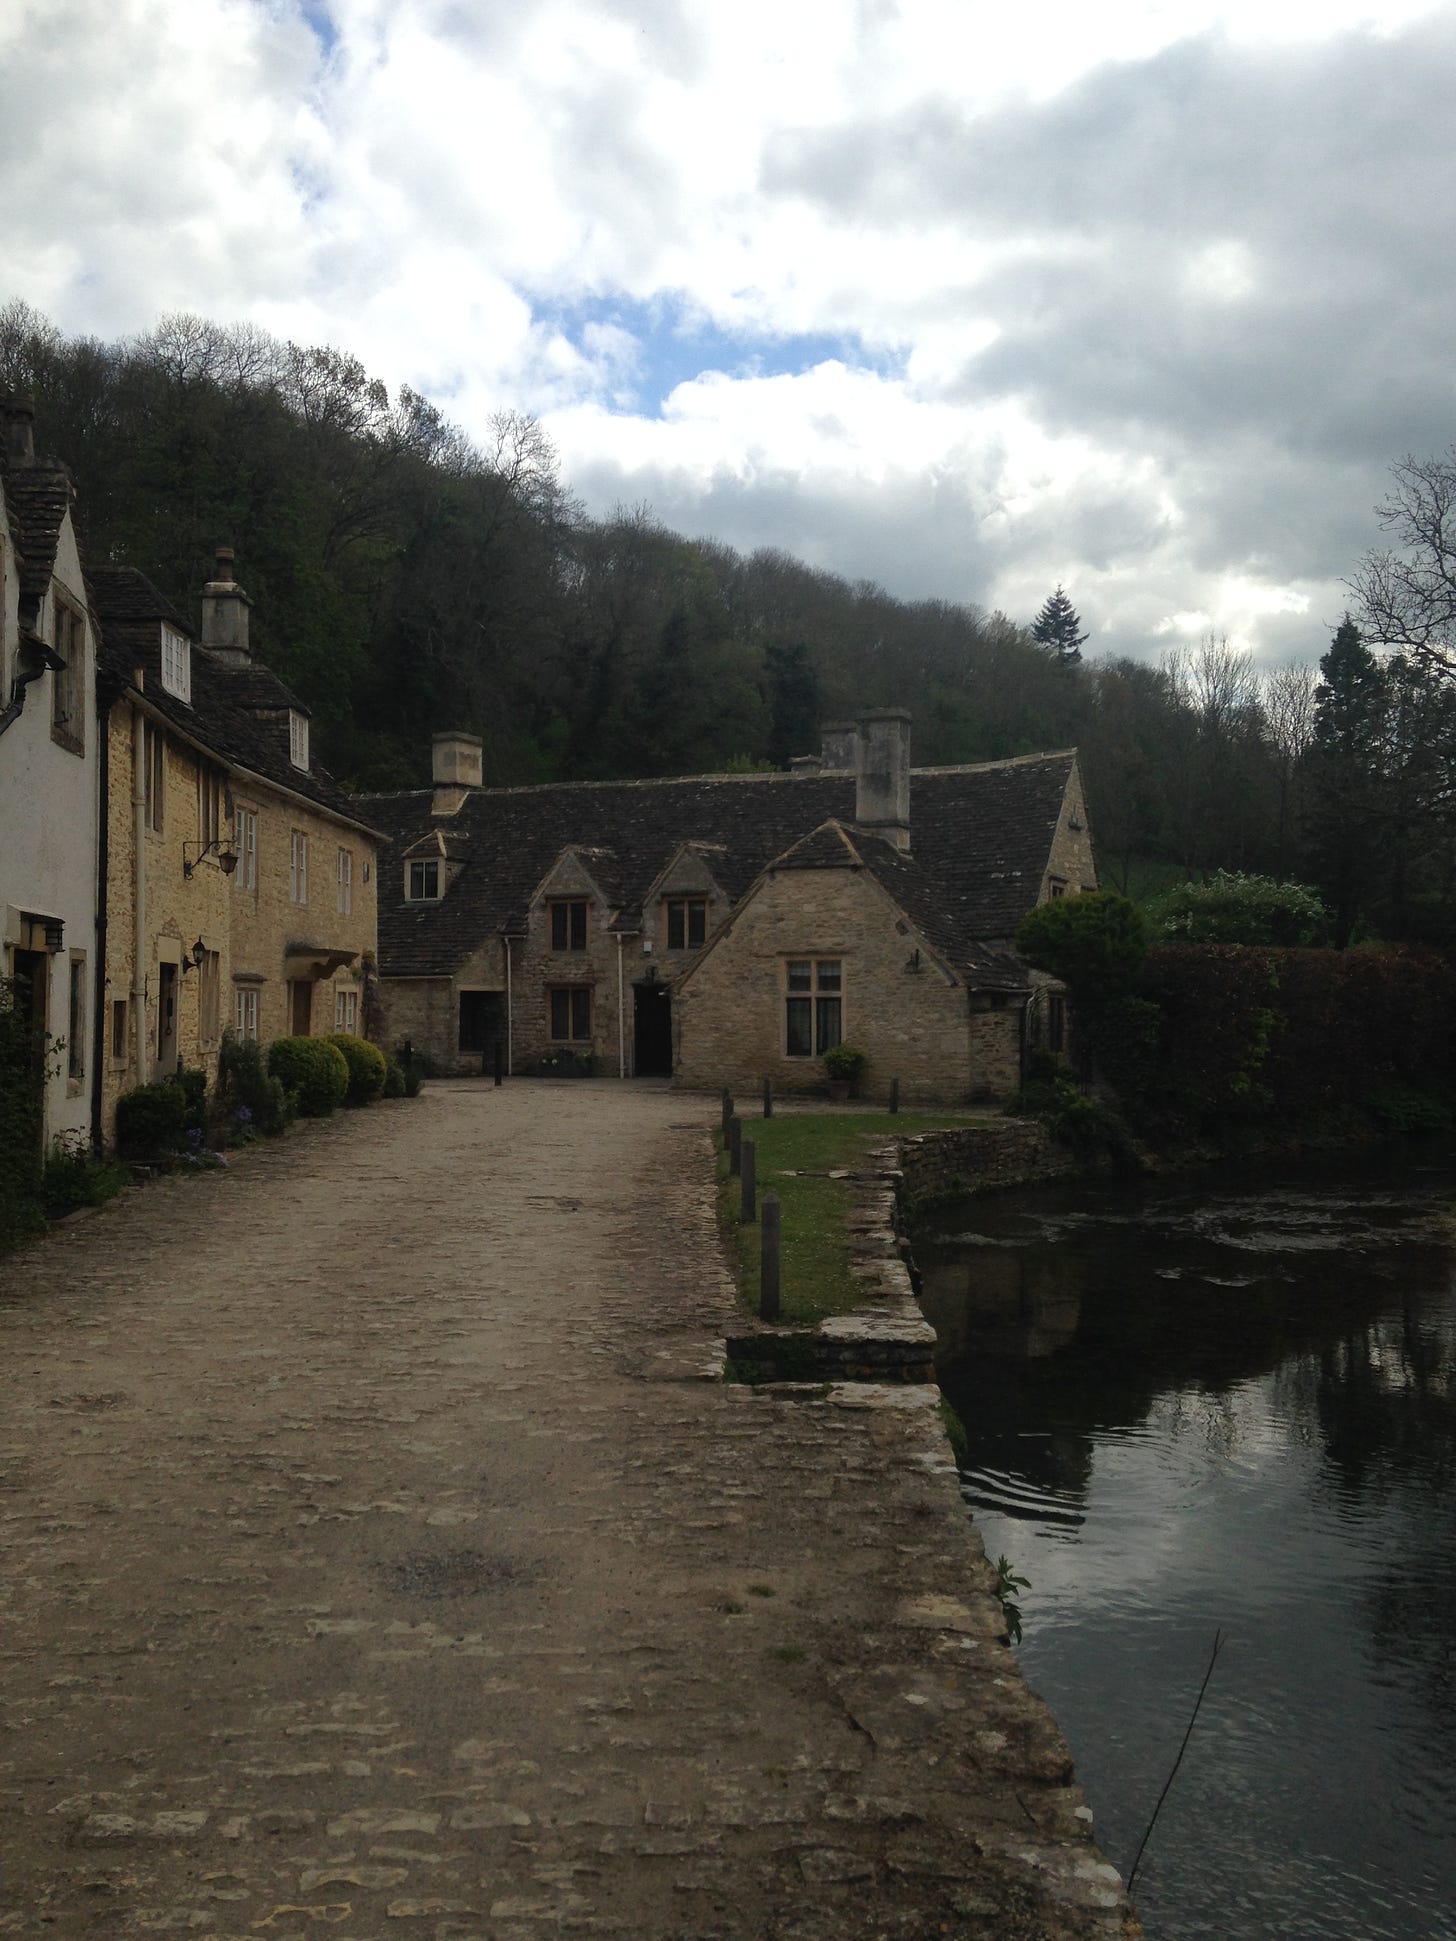 The beautiful village of Castle Combe, Wiltshire